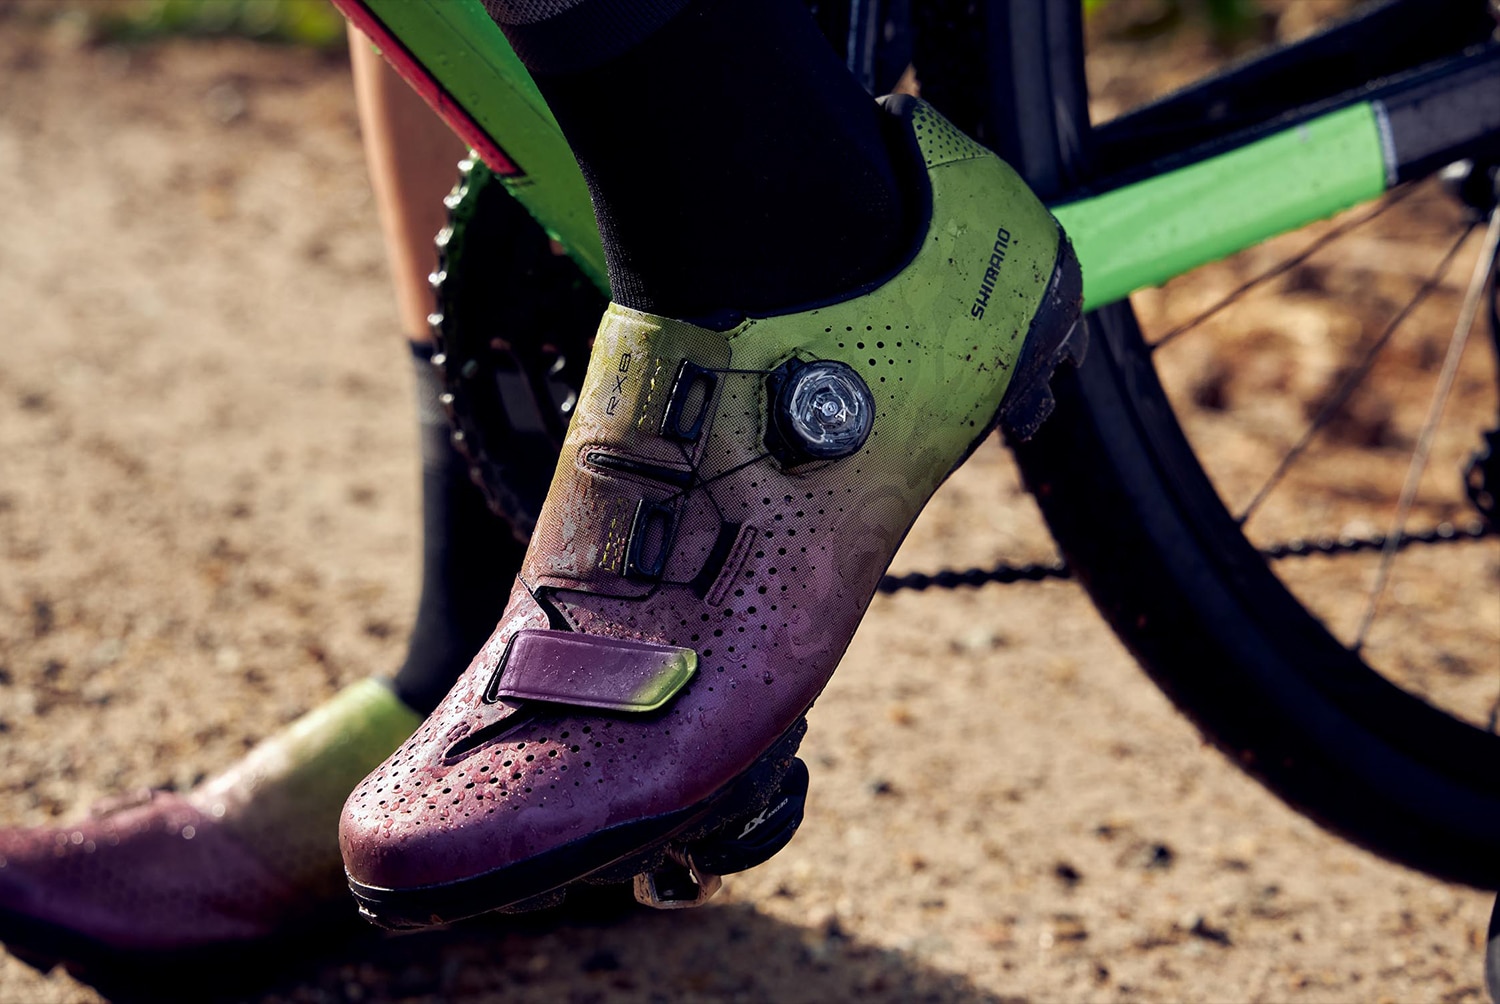 Cycling Shoes Demystified: What Type of Shoe is Right For You?